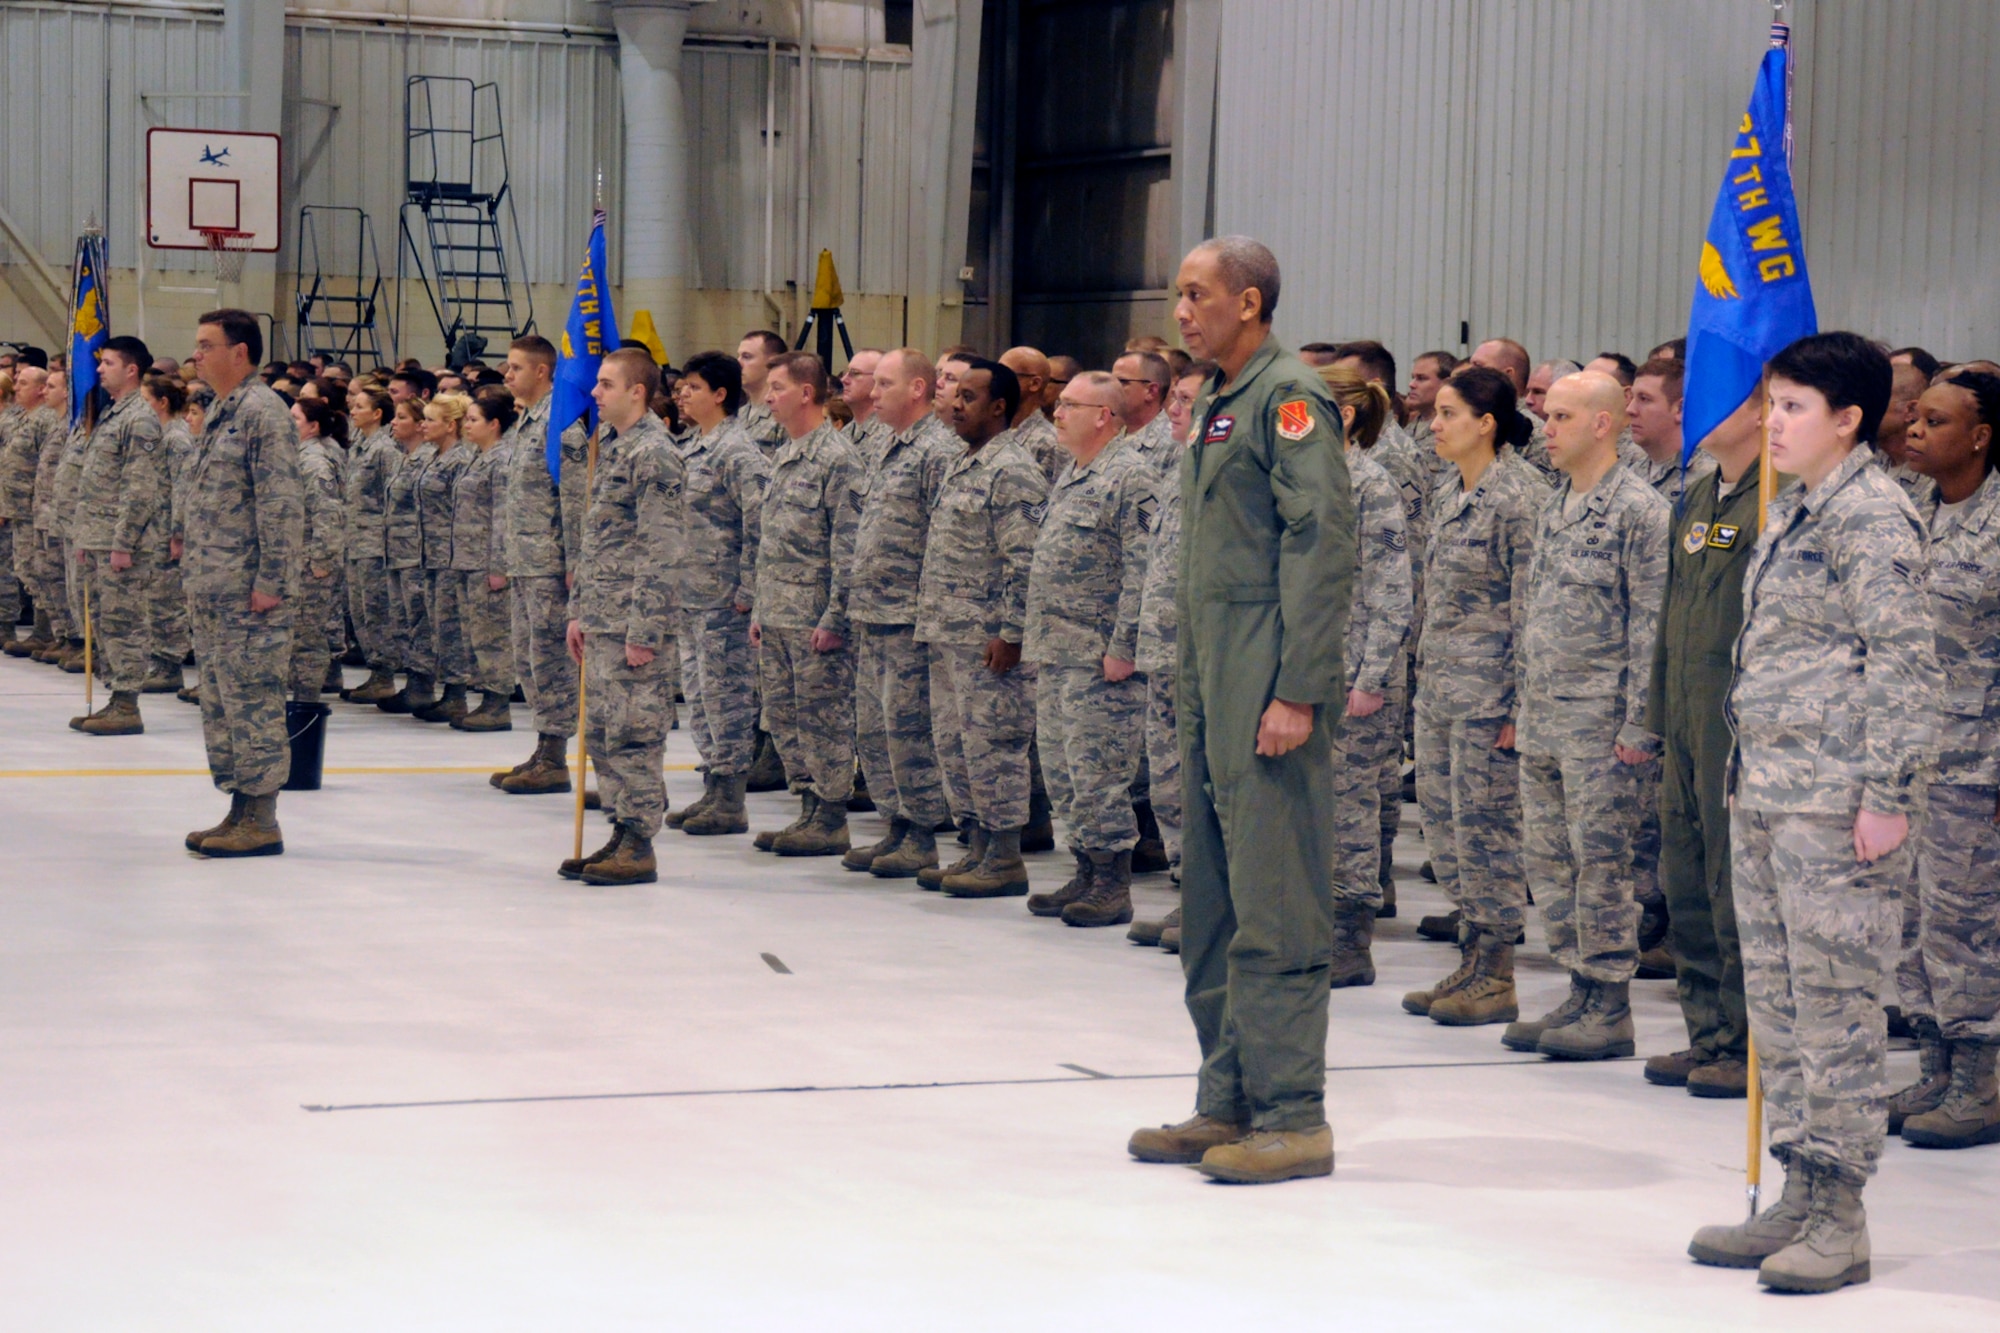 Airmen of the 127th Wing, Michigan Air National Guard, stand at attention during a commander's call and wing formation ceremony, Dec. 4, 2011, at Selfridge Air National Guard Base, Mich. The 127th Wing holds a formation near the end of the year to recognize outstanding achievements of its Airmen. (U.S. Air Force photo by TSgt. David Kujawa)